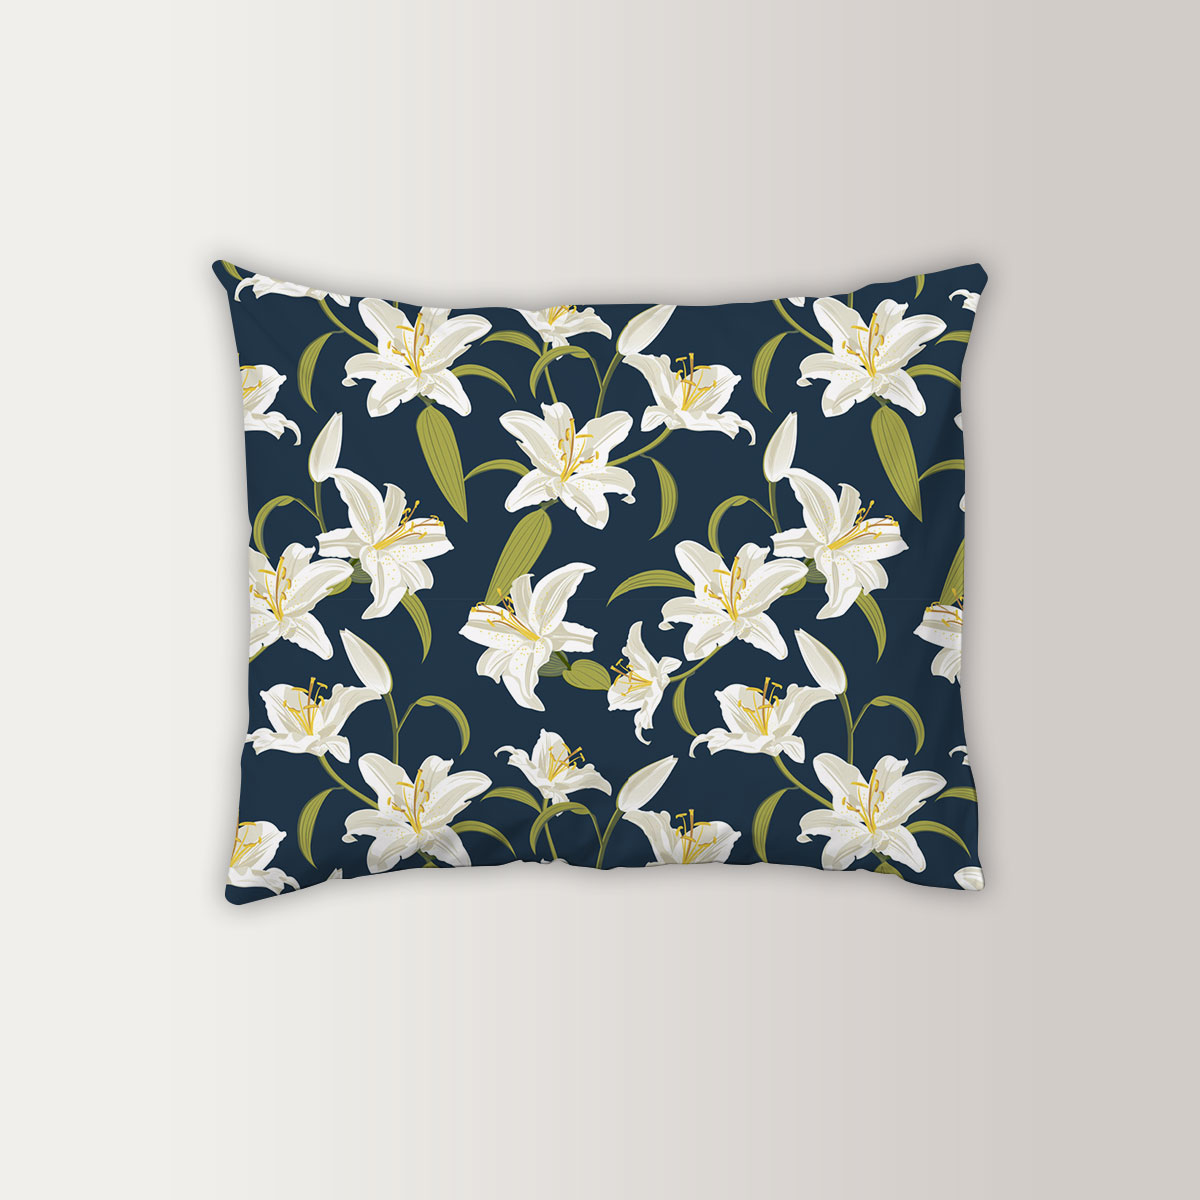 Lily Seamless Pattern On Blue Background Pillow Case